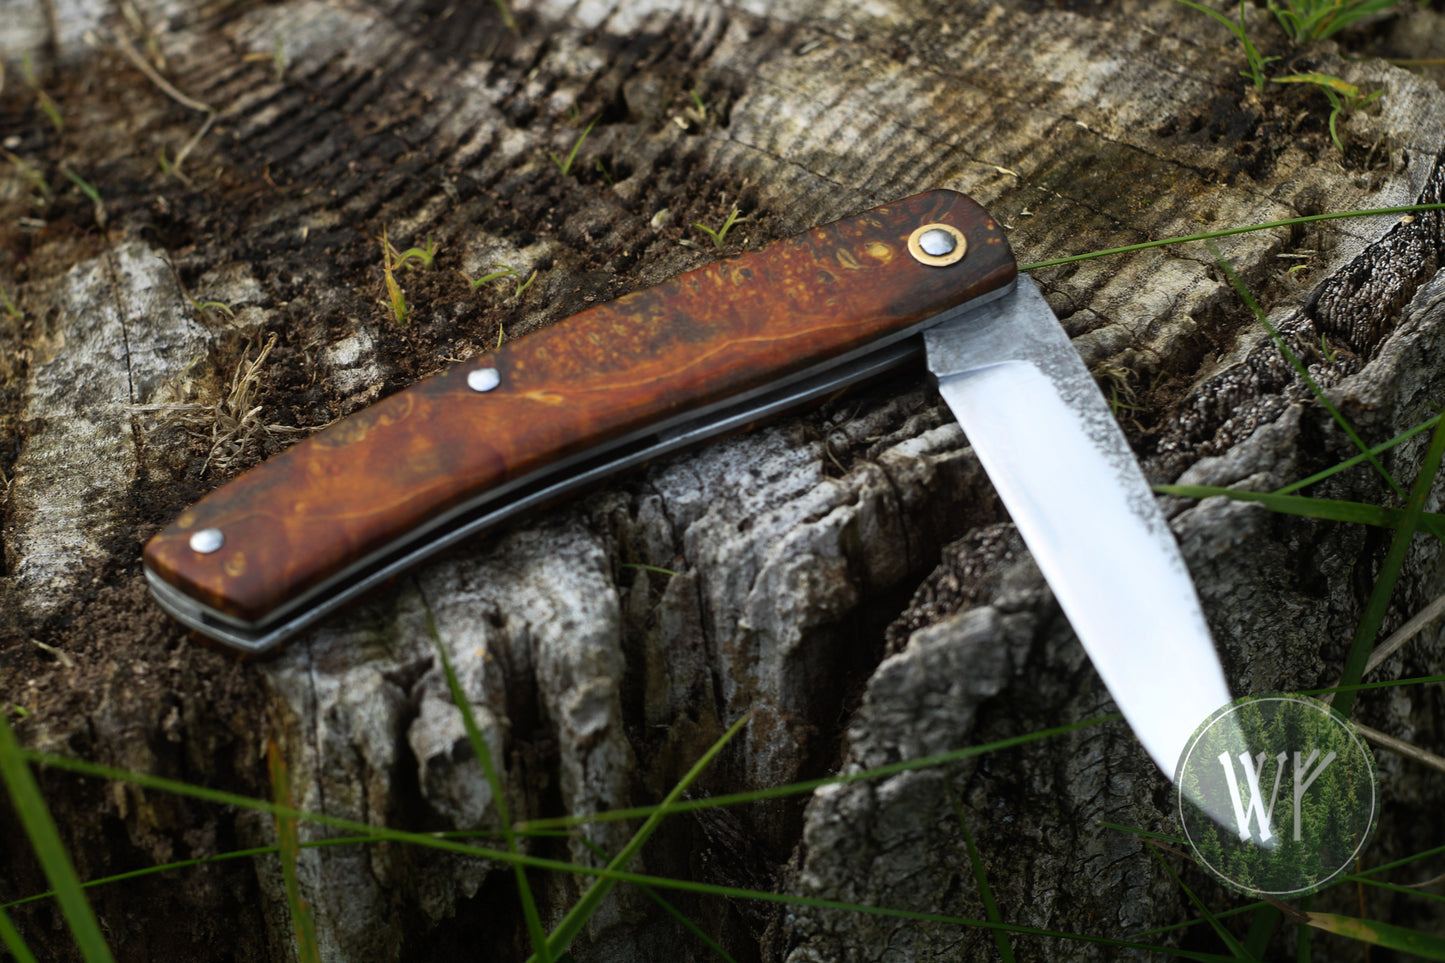 Hand-forged slipjoint folding knife with Box Elder Burl scales